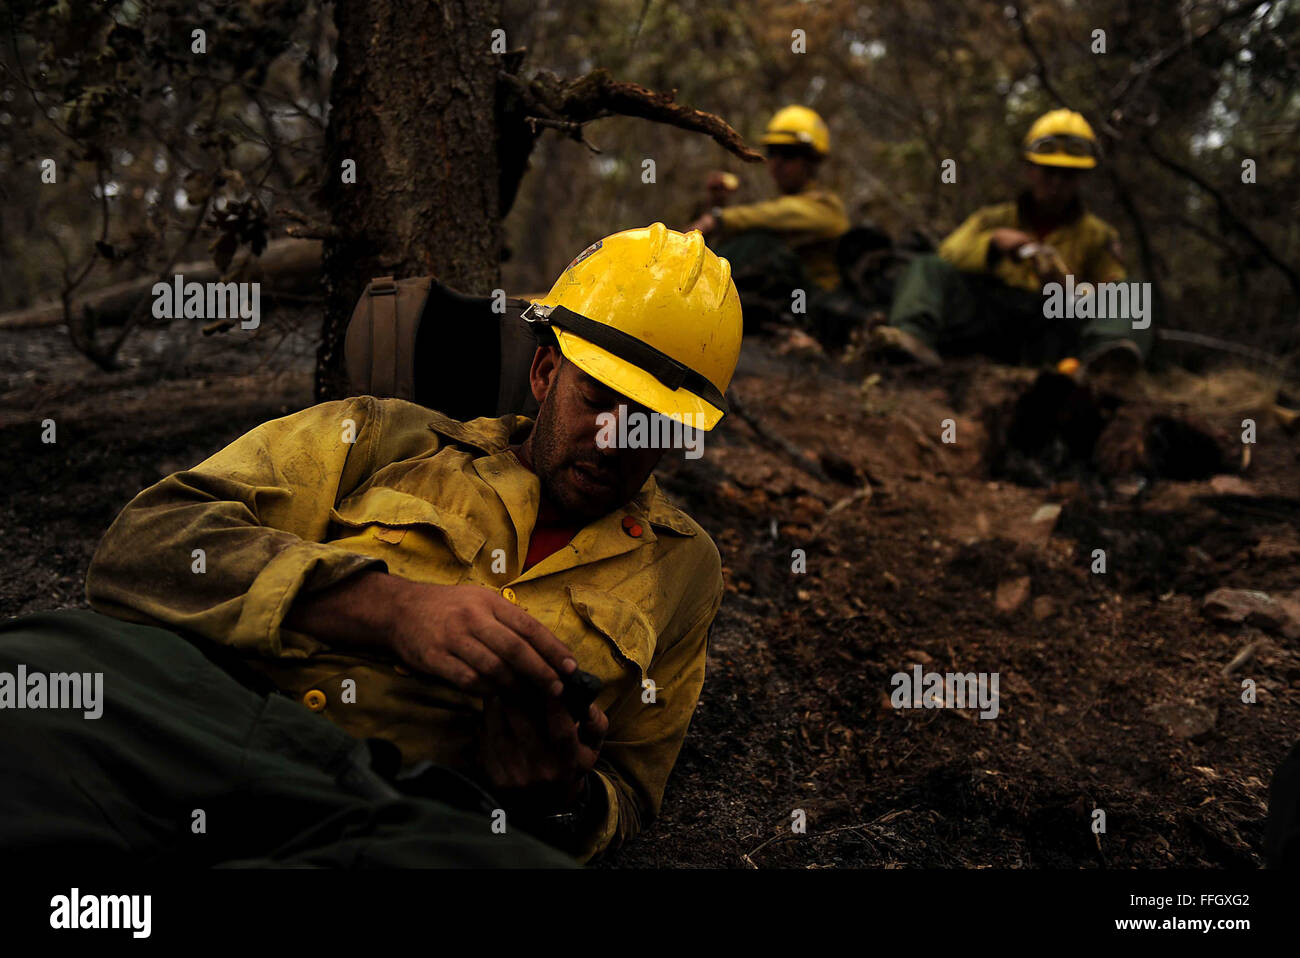 Vandenberg Air Force Base Hot Shot fire fighter Chris Loung looks at his phone during a team lunch break from cutting a fire line on June 28, 2012 in the Mount Saint Francois area of Colorado Springs, Co. while helping to battle several fires in Waldo Canyon.  The Waldo Canyon fire has grown to 18,500 acres and burned over 300 homes. Currently, more than 90 firefighters from the Academy, along with assets from Air Force Space Command; F.E. Warren Air Force Base, Wyo.; Fort Carson, Colo.; and the local community continue to fight the Waldo Canyon fire. Stock Photo